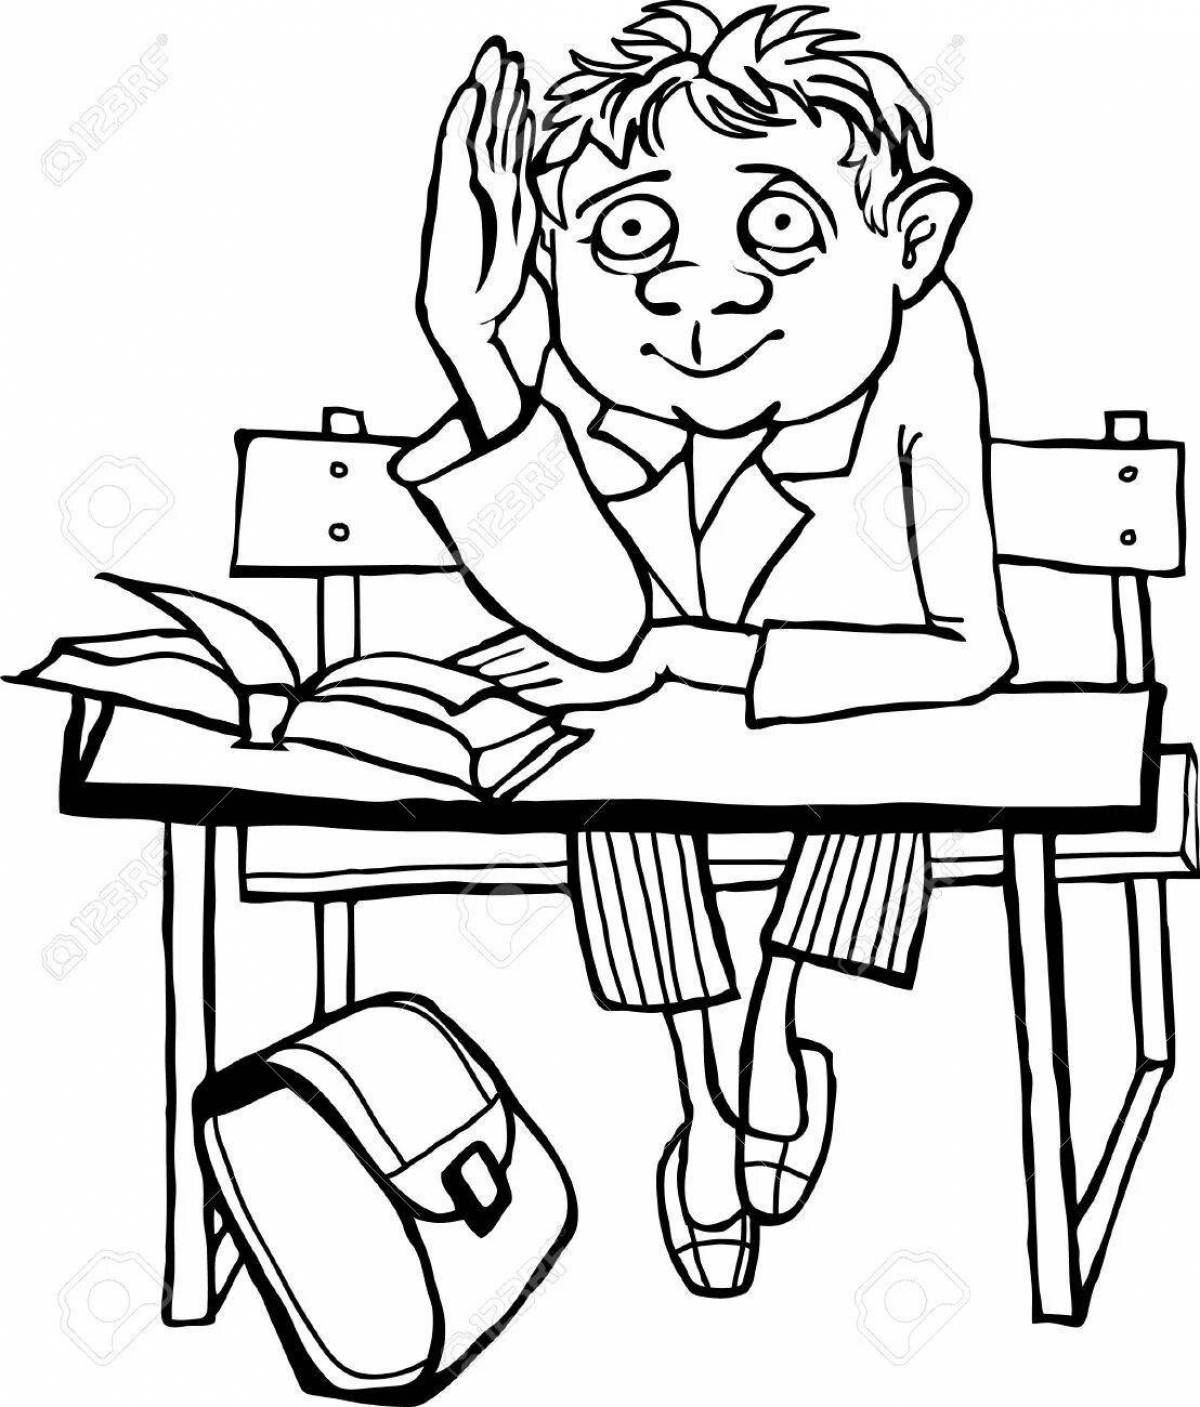 A busy student at a desk